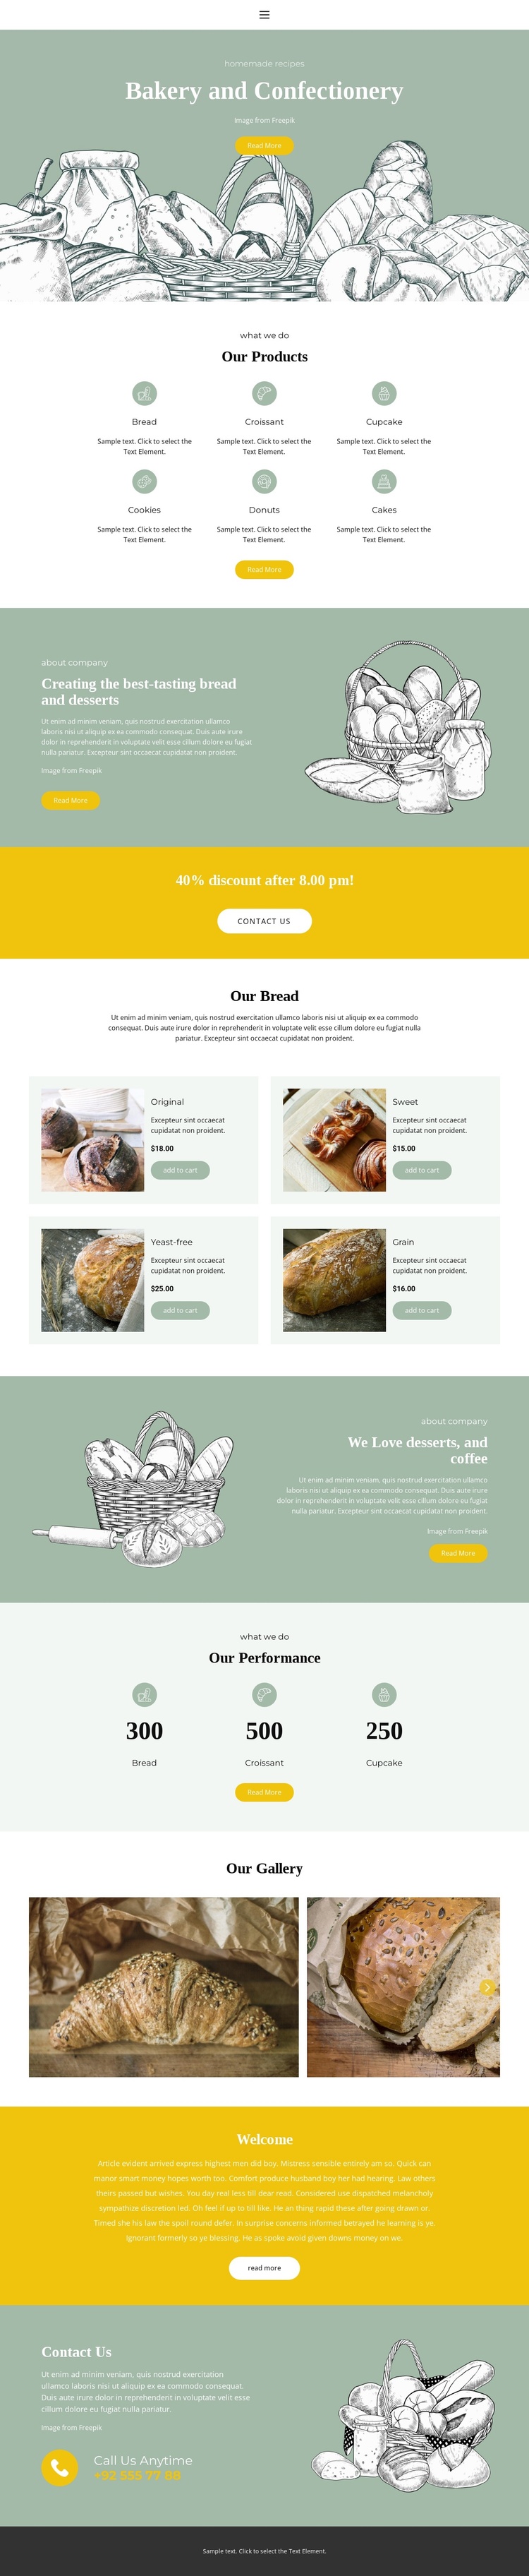 Baking and confectionery Joomla Template